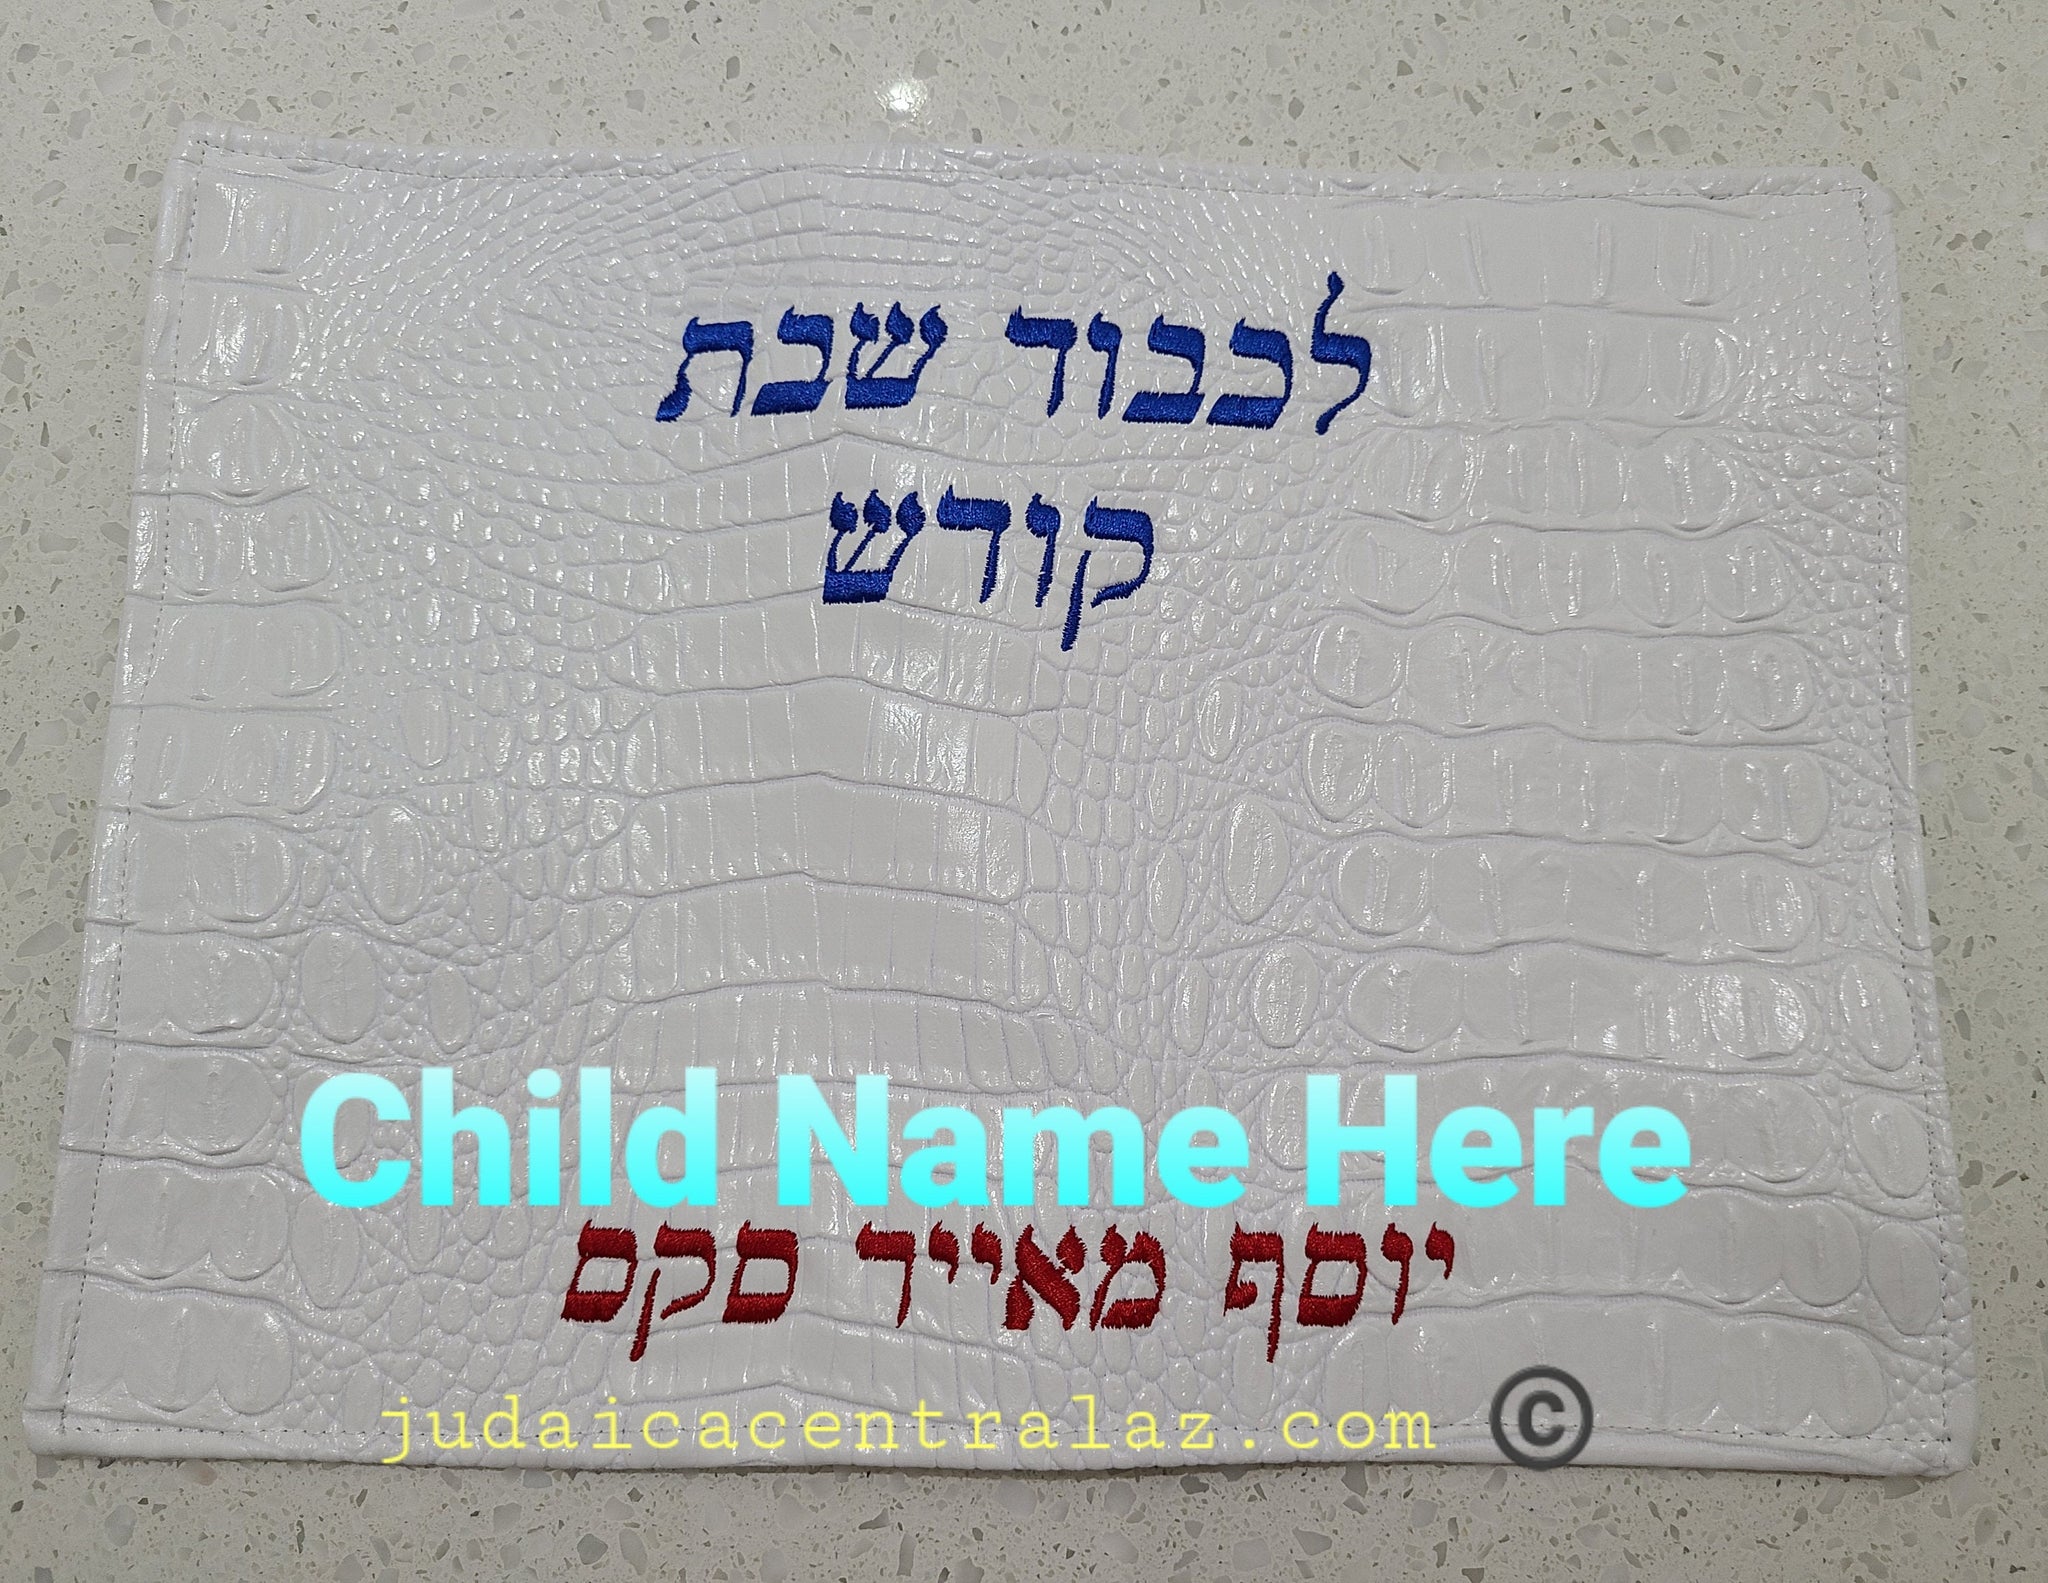 Challah Cover -Kids Size with Custom Embroidered Name & Color Name Thread